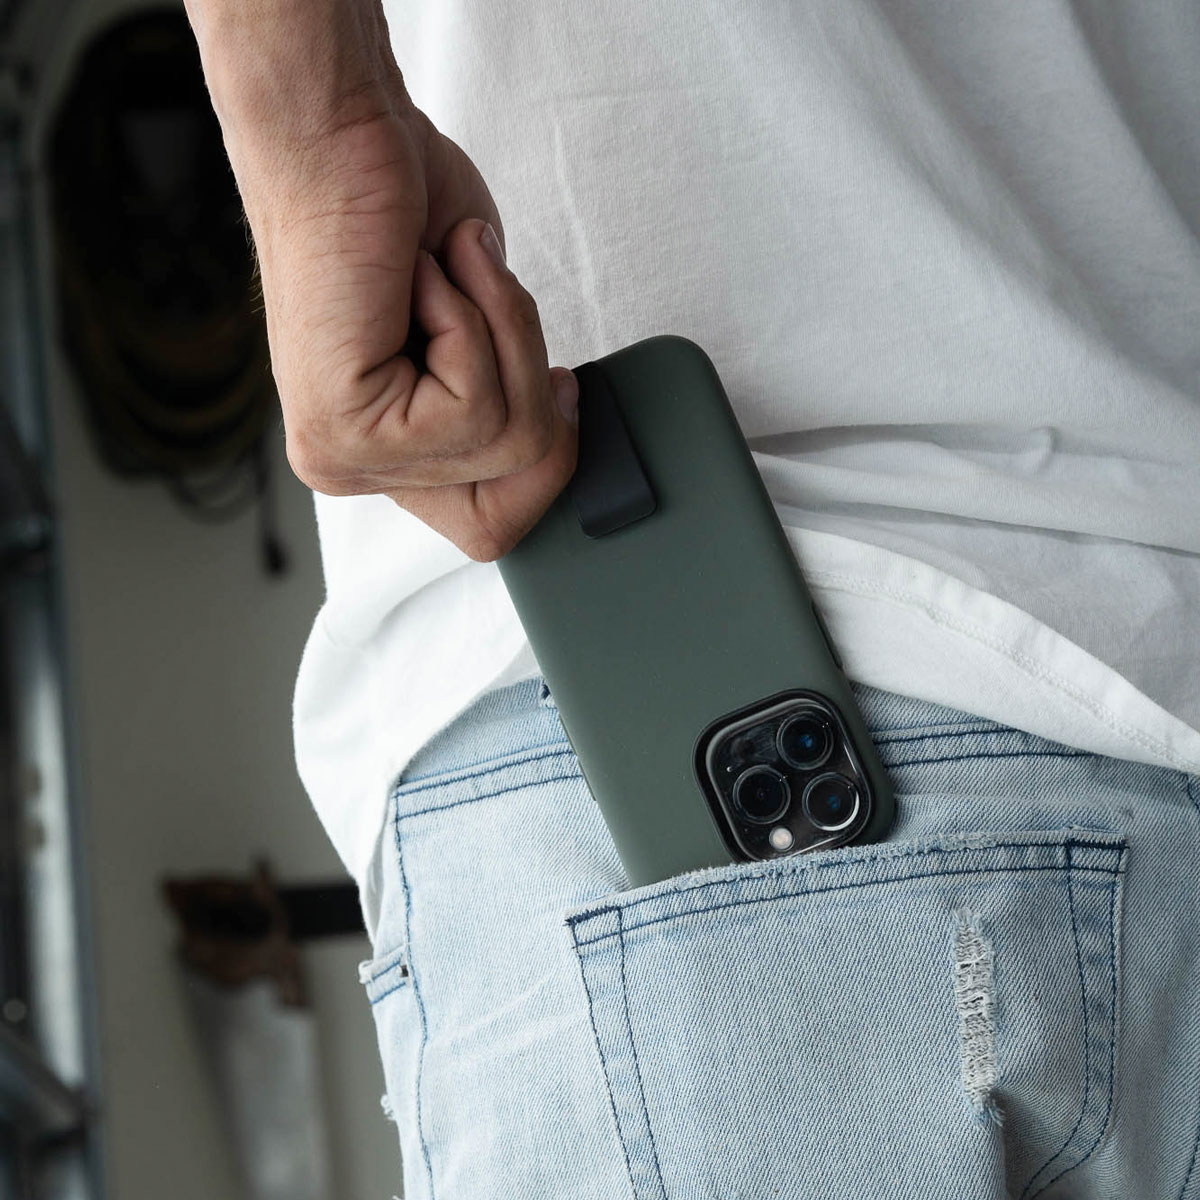 Person tucking their phone with a green Motus phone case into their back pocket.